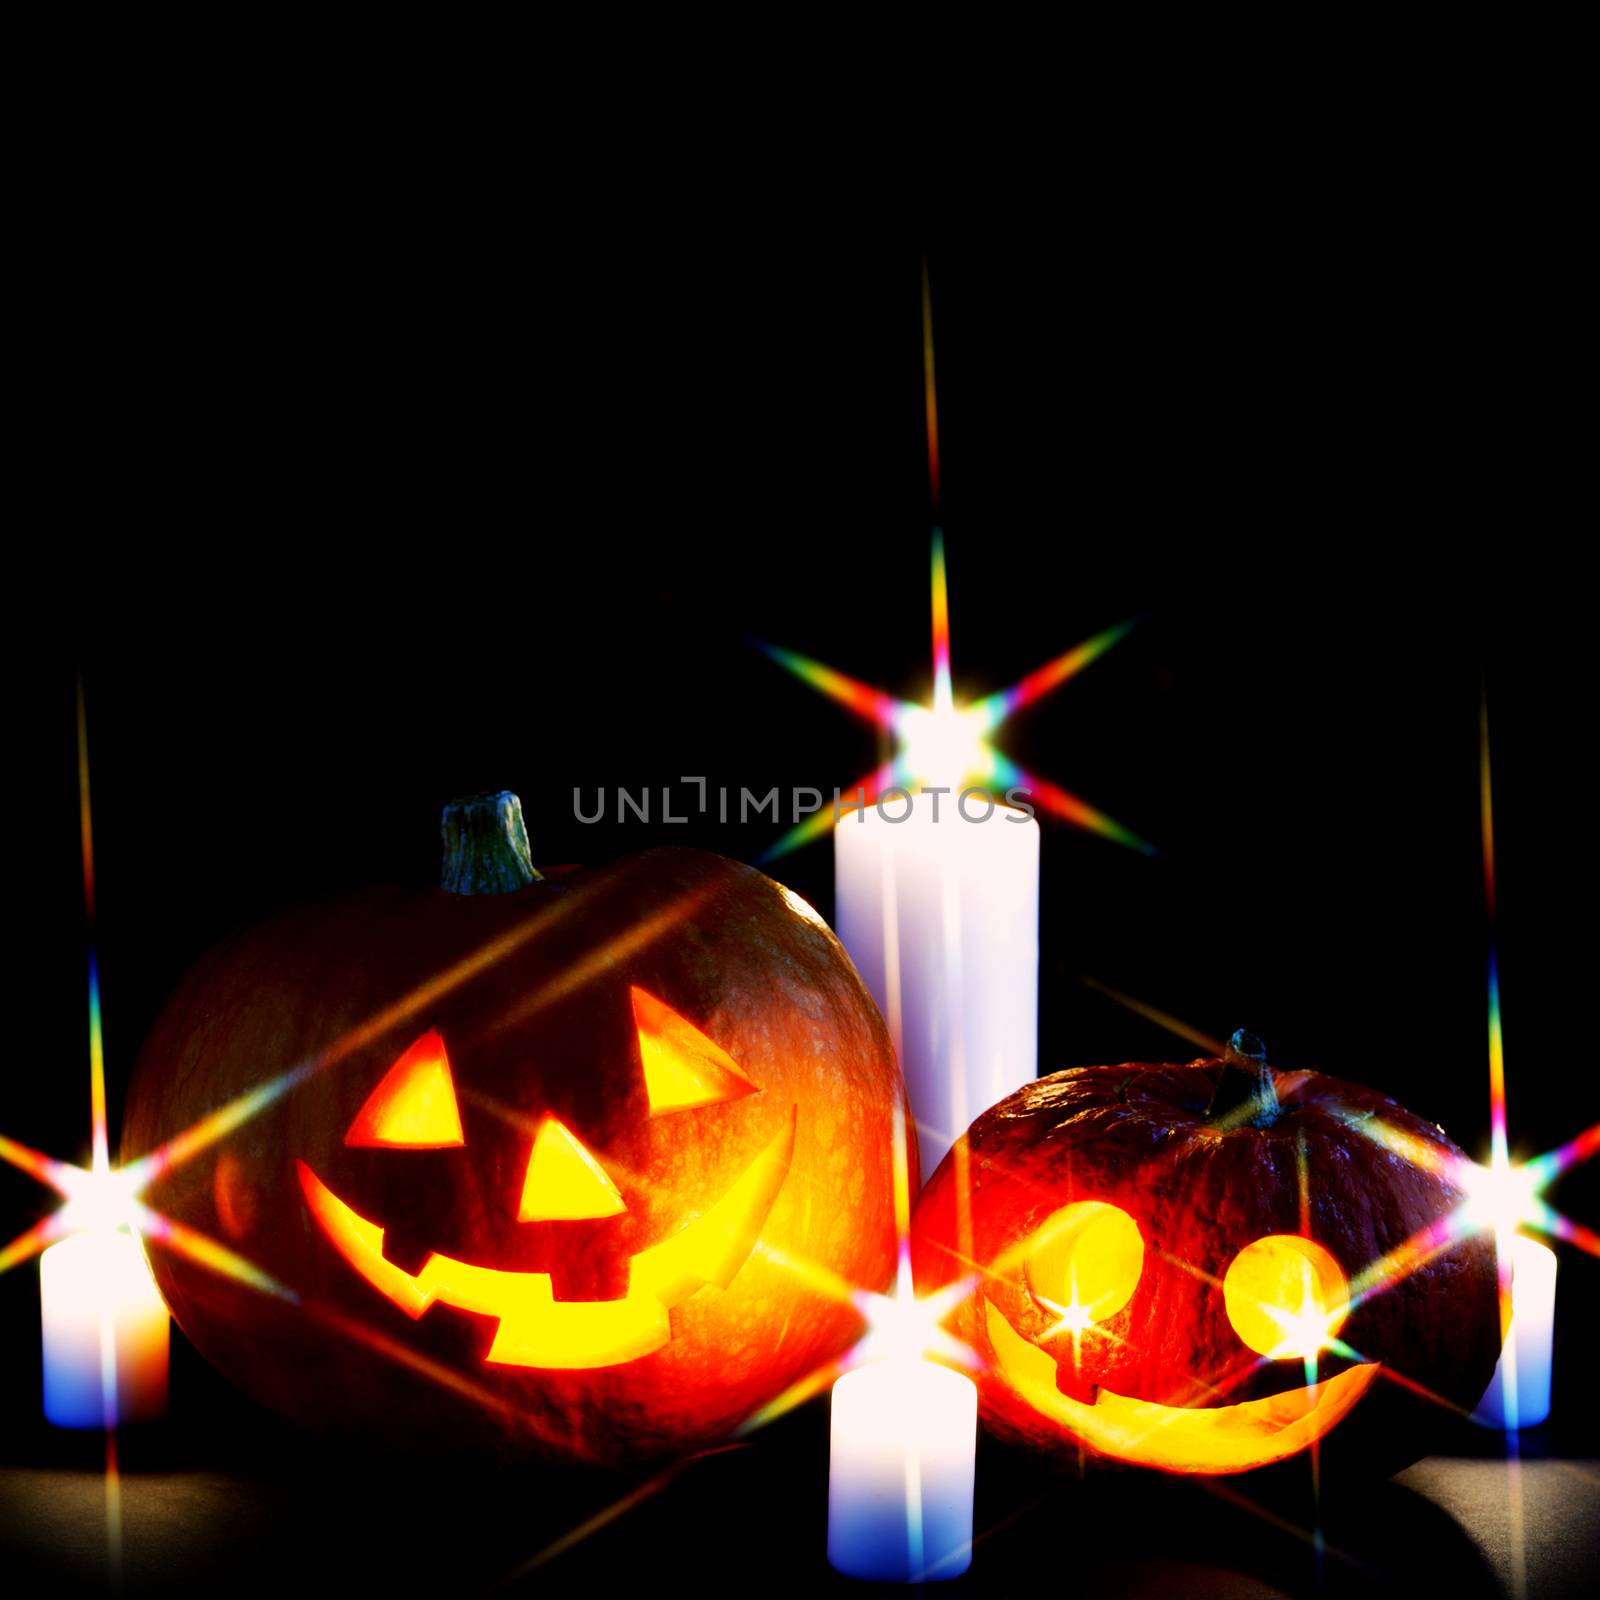 Funny Halloween pumpkins and burning candles on black background